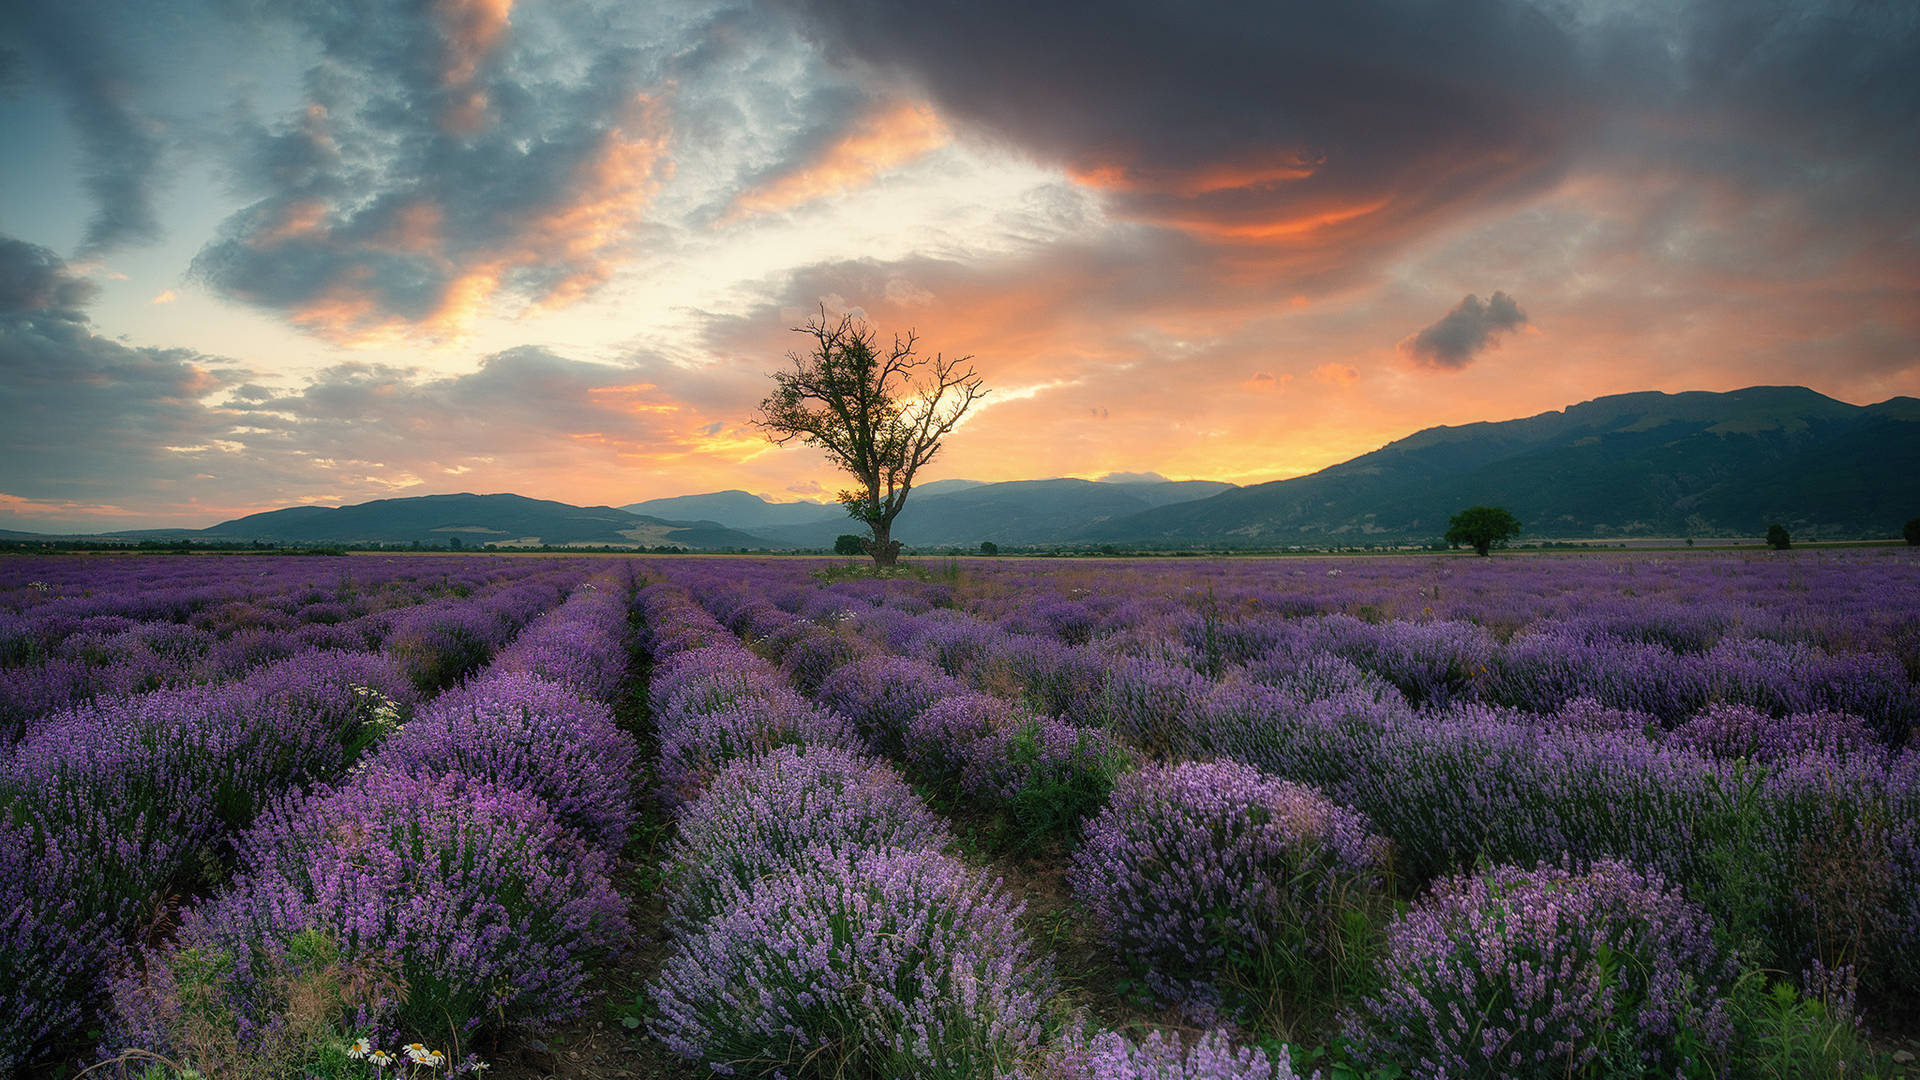 Lavender Aesthetic Field, Mountains, And Sunset